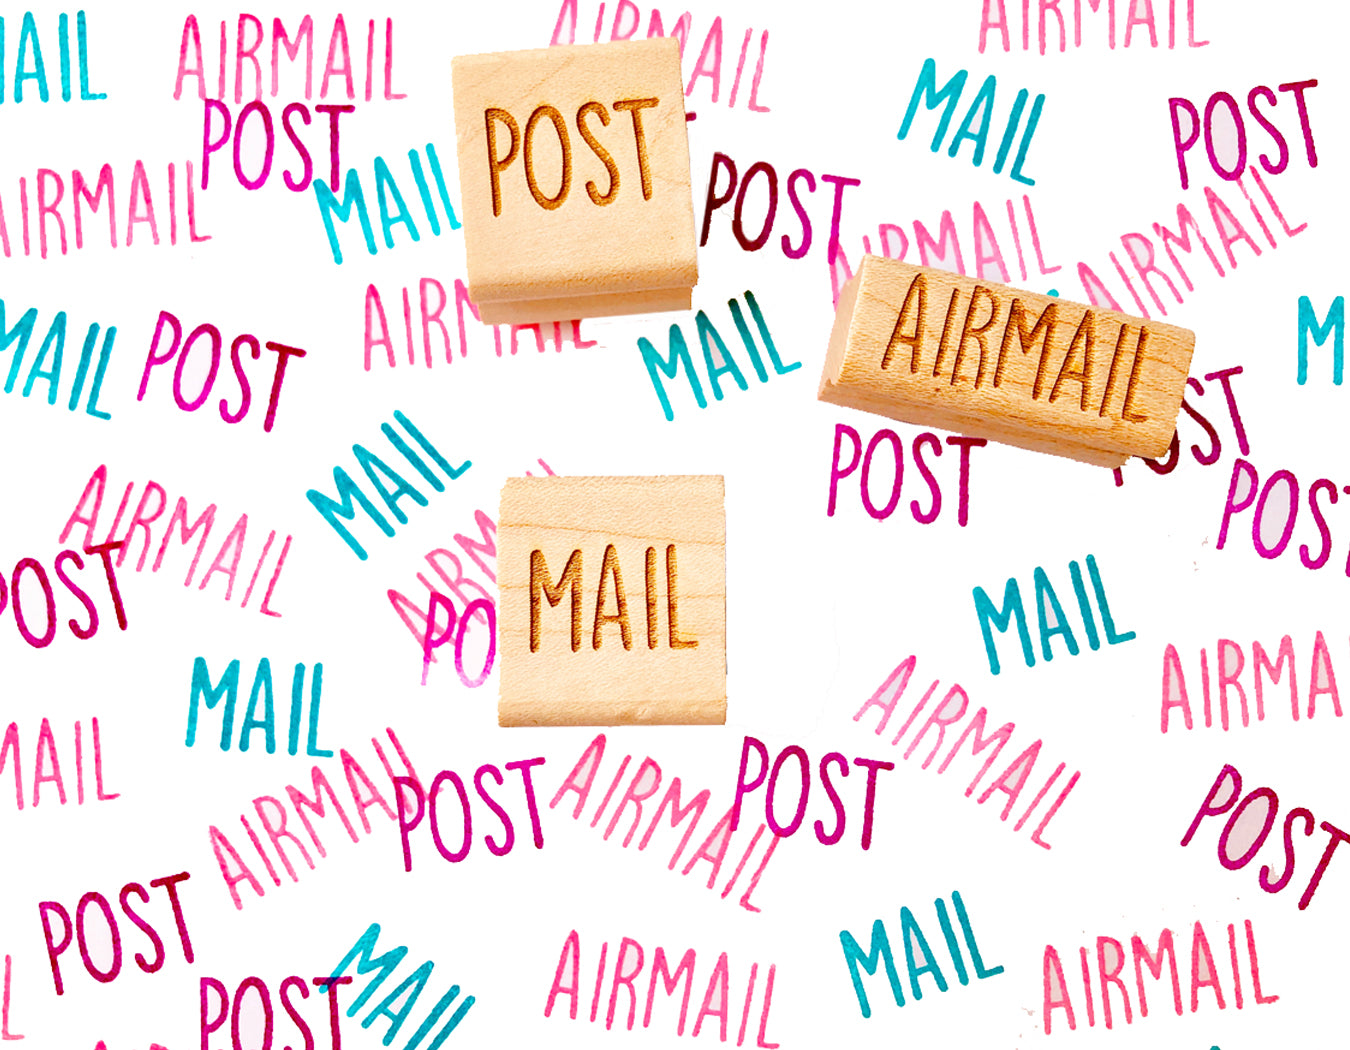 Snail Mail stamps, airmail mail post rubber stamps